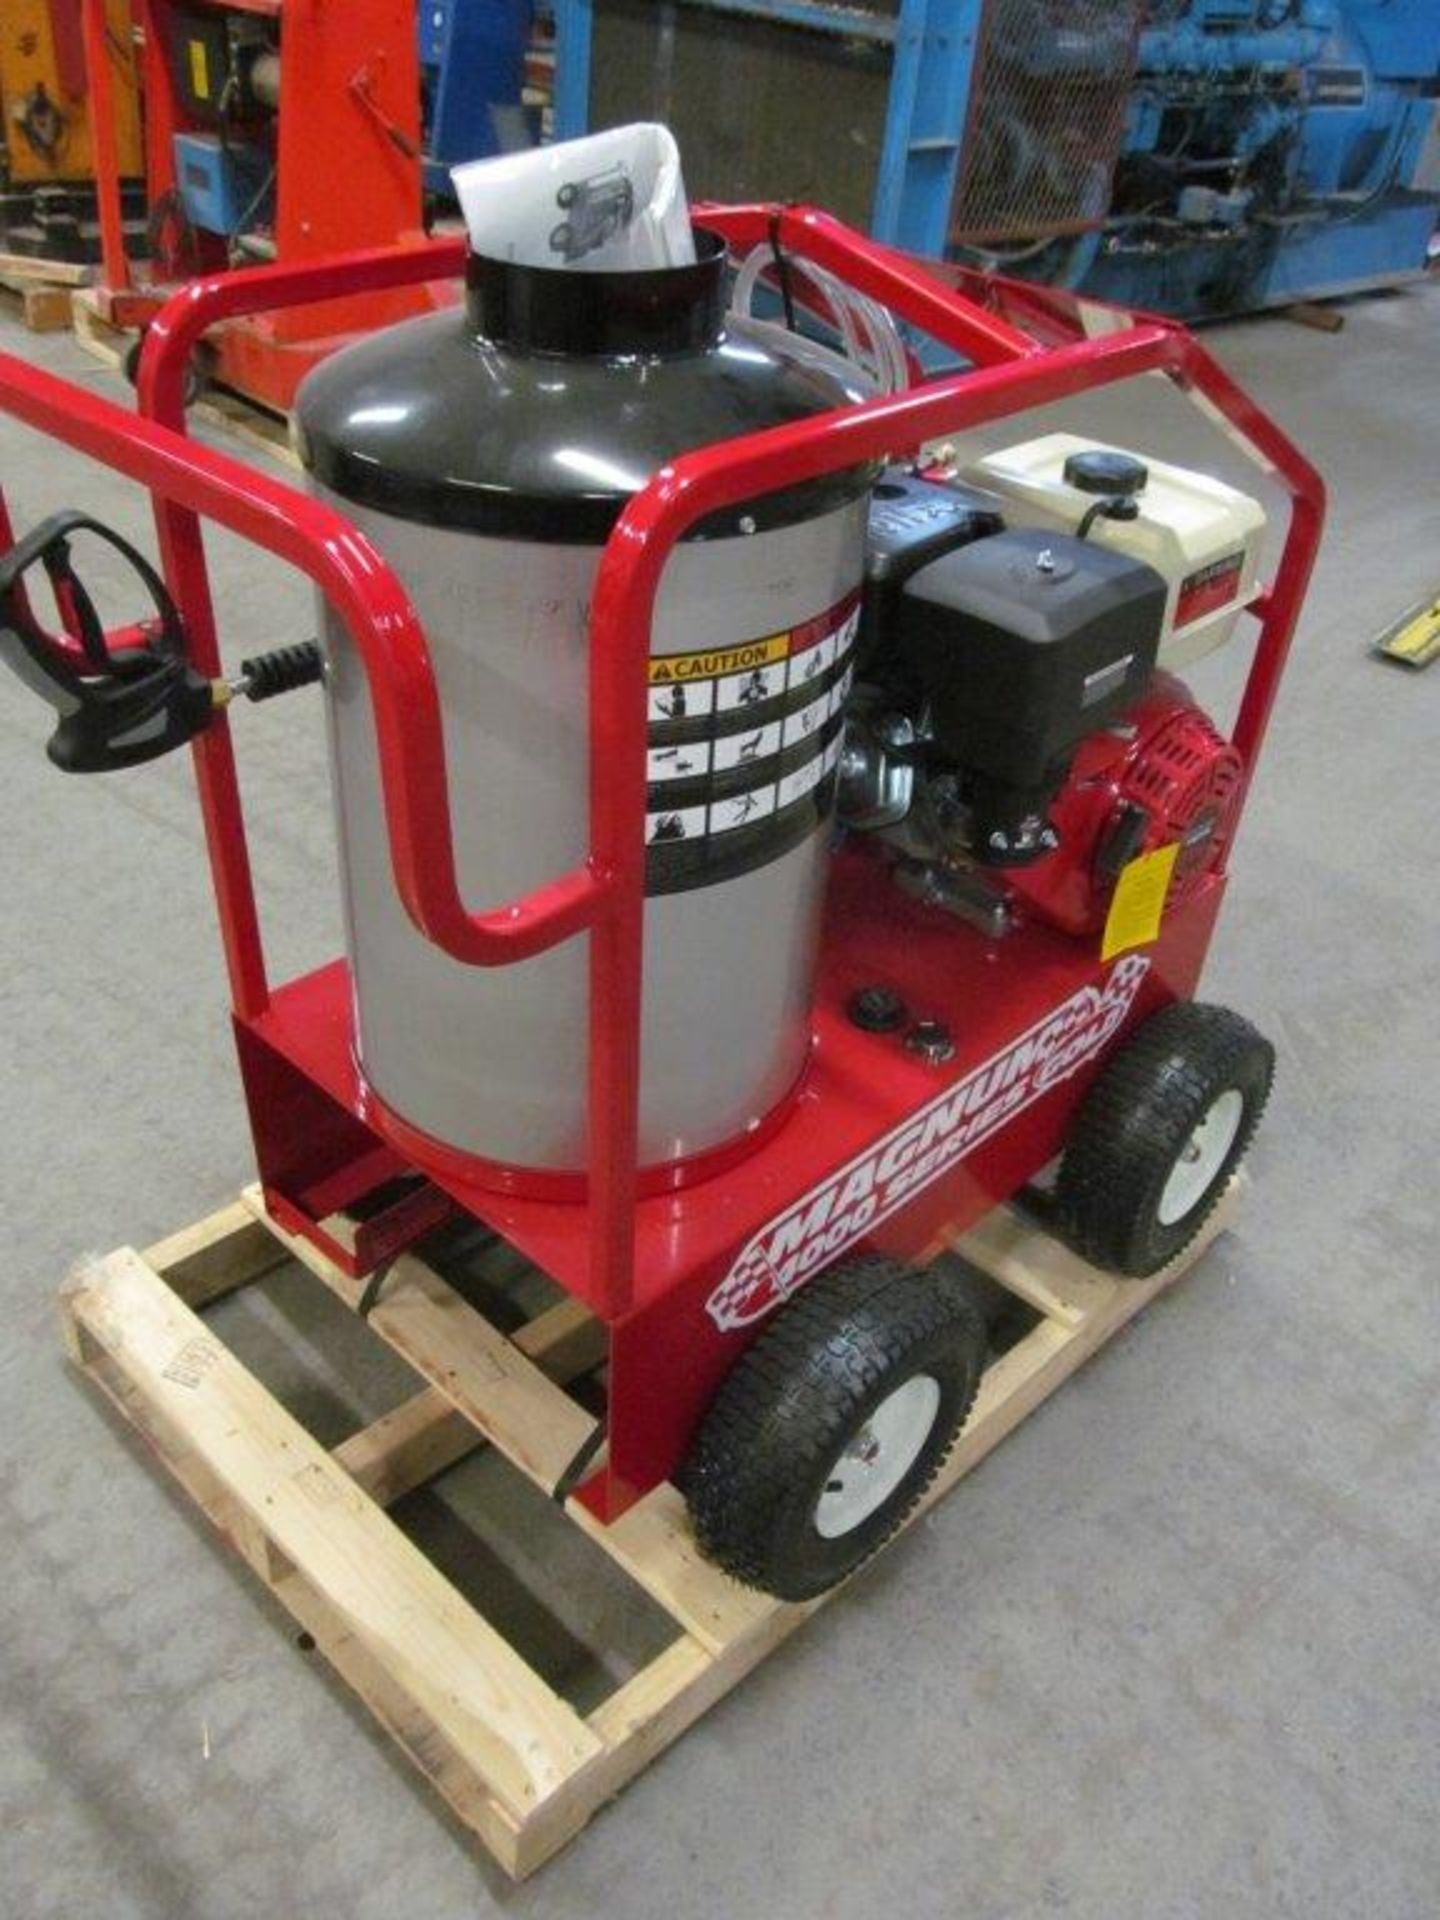 BRAND NEW EASY-KLEEN HOT WATER PRESSURE WASHER MODEL MAGNUM GOLD, LOCATION: HAWKESBURY, ONTARIO - Image 6 of 11